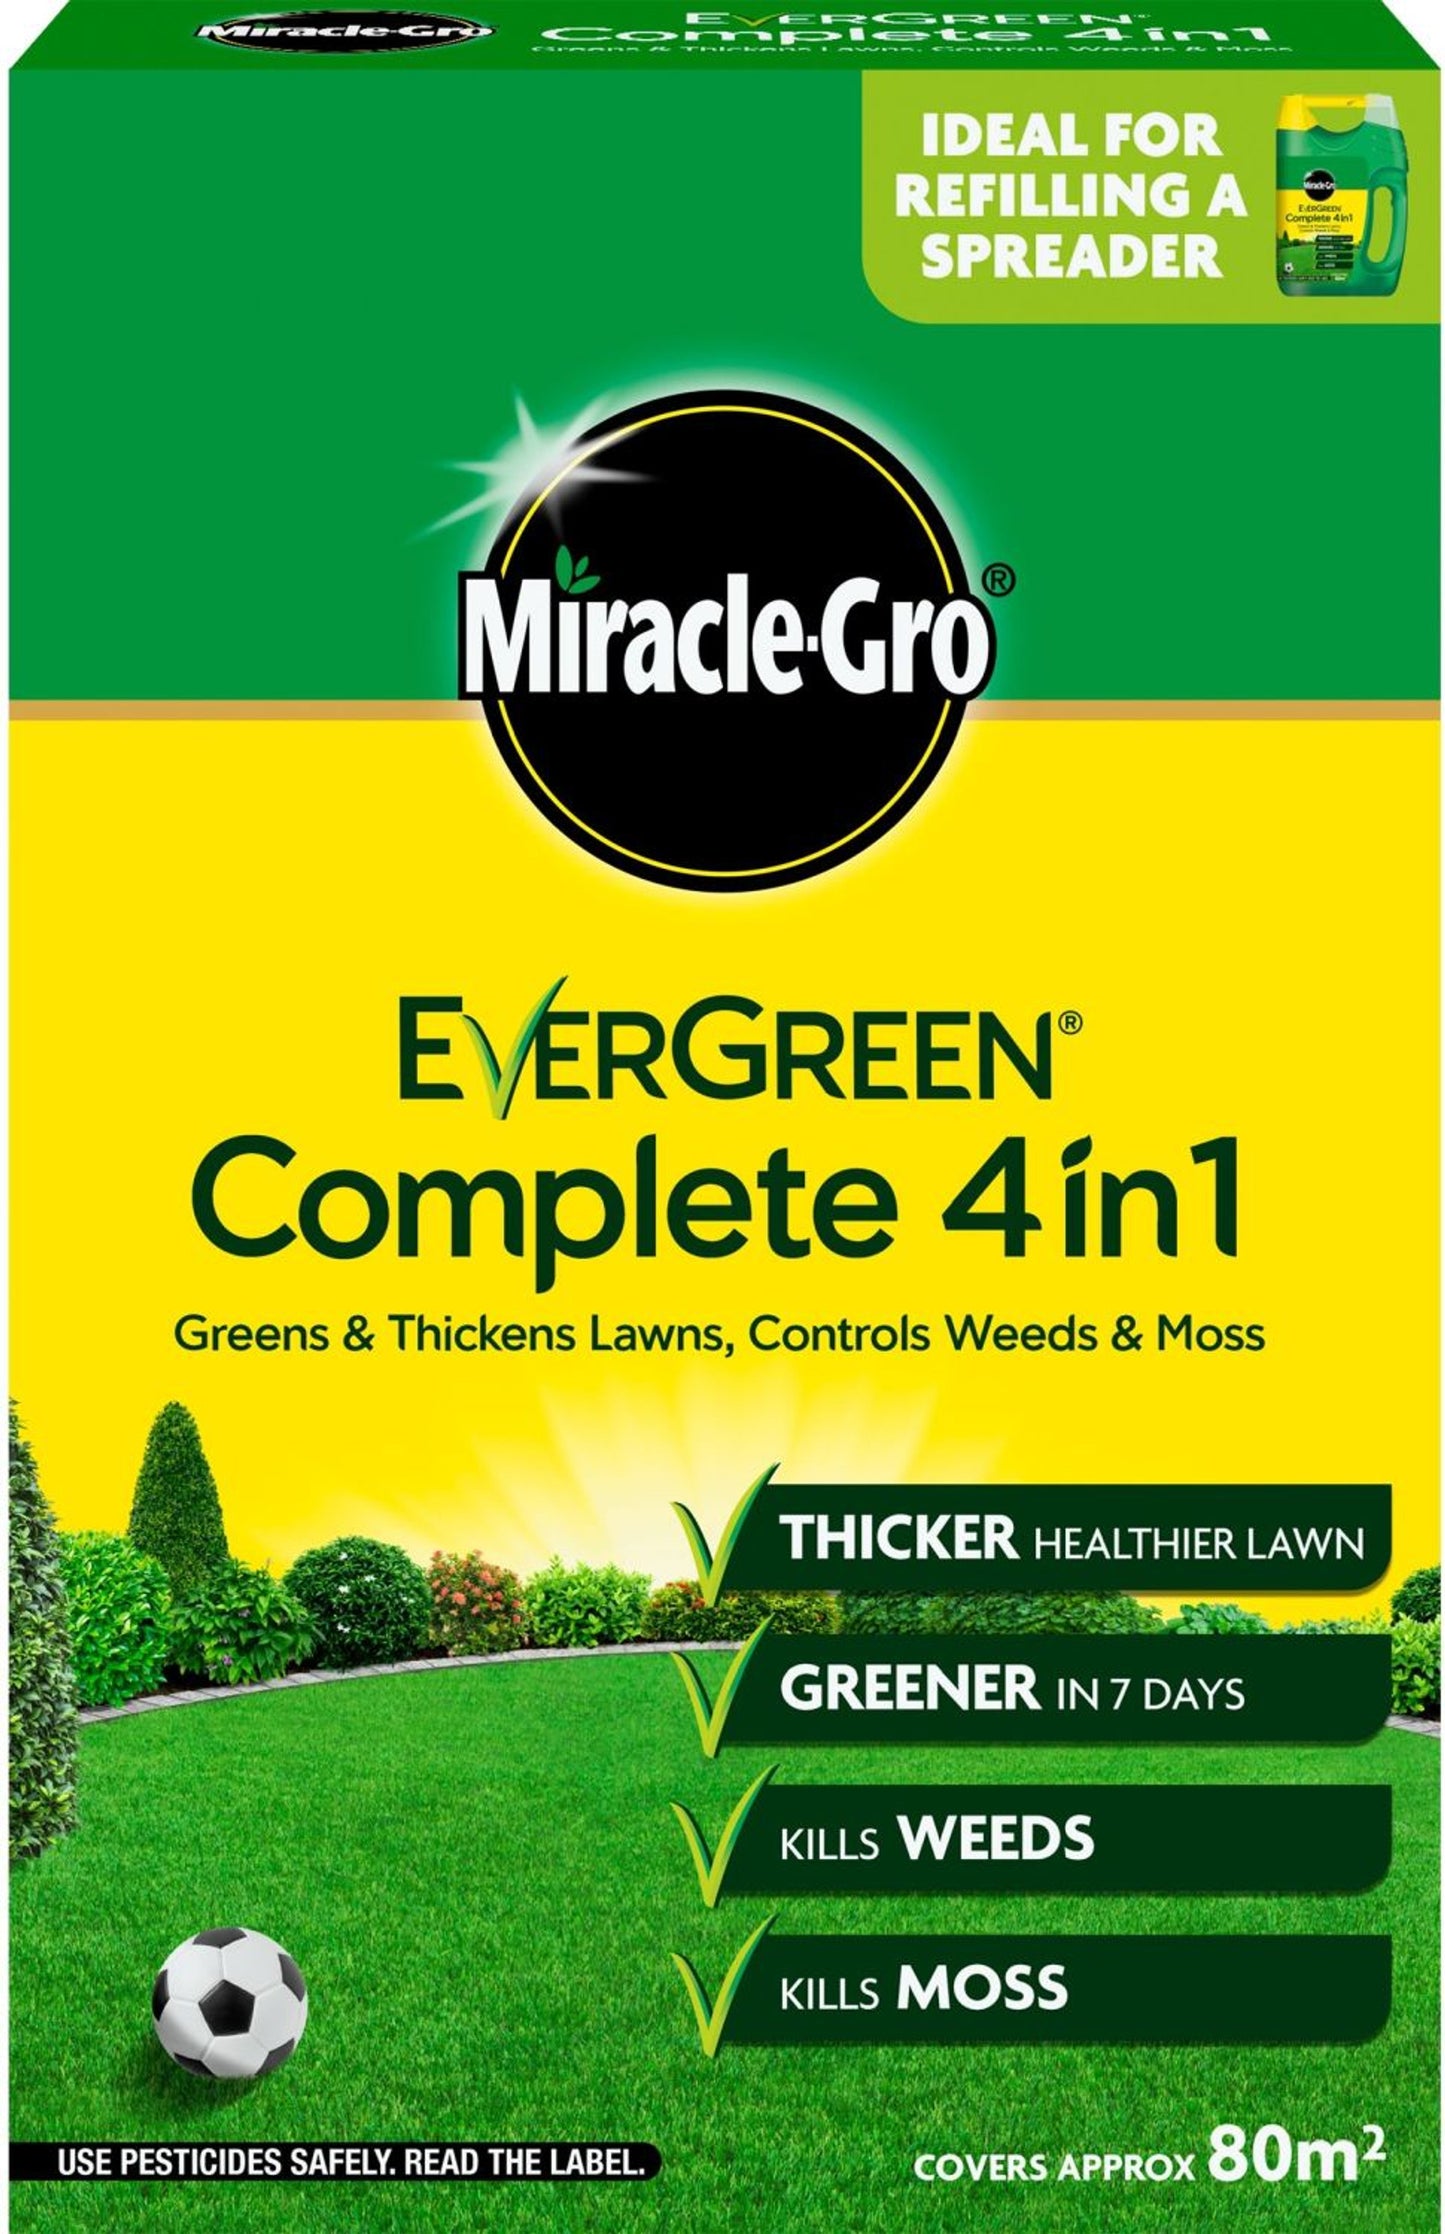 Miracle Grow Evergreen Complete 4 in 1 - 80 sqm